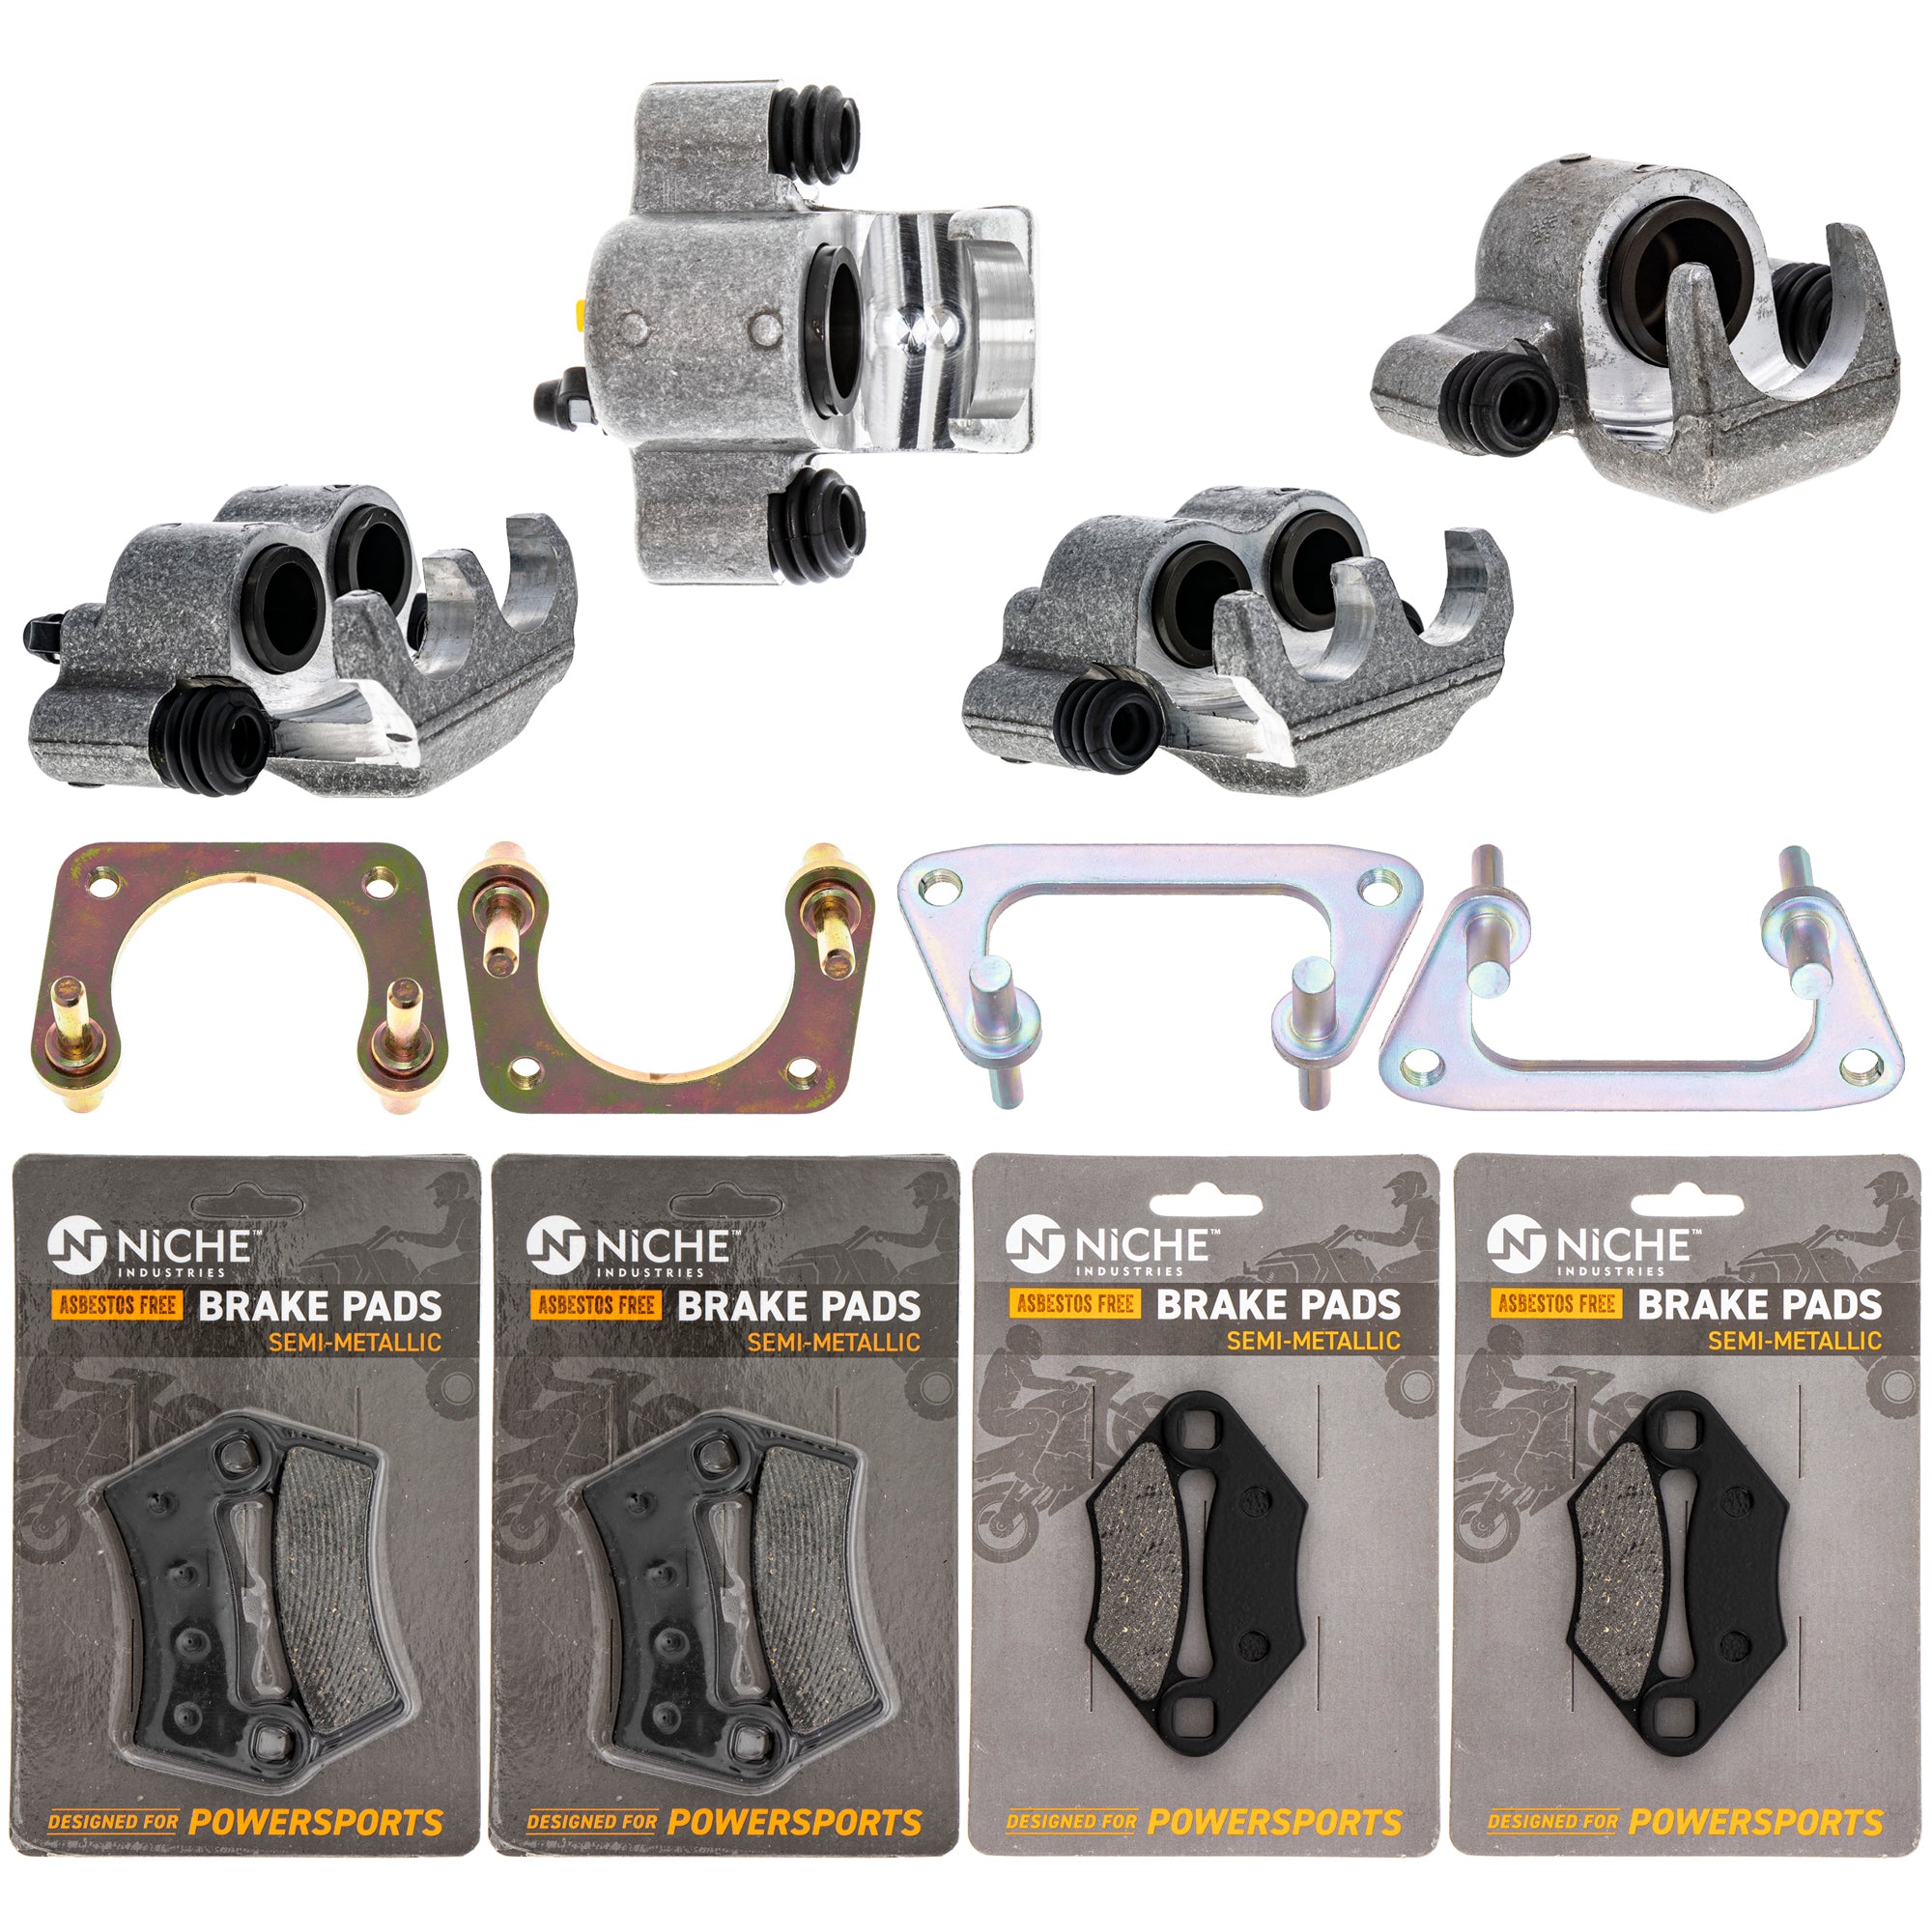 Brake Calipers & Pads Kit (4) Front/Rear for zOTHER Polaris GEM RZR NICHE MK1008219